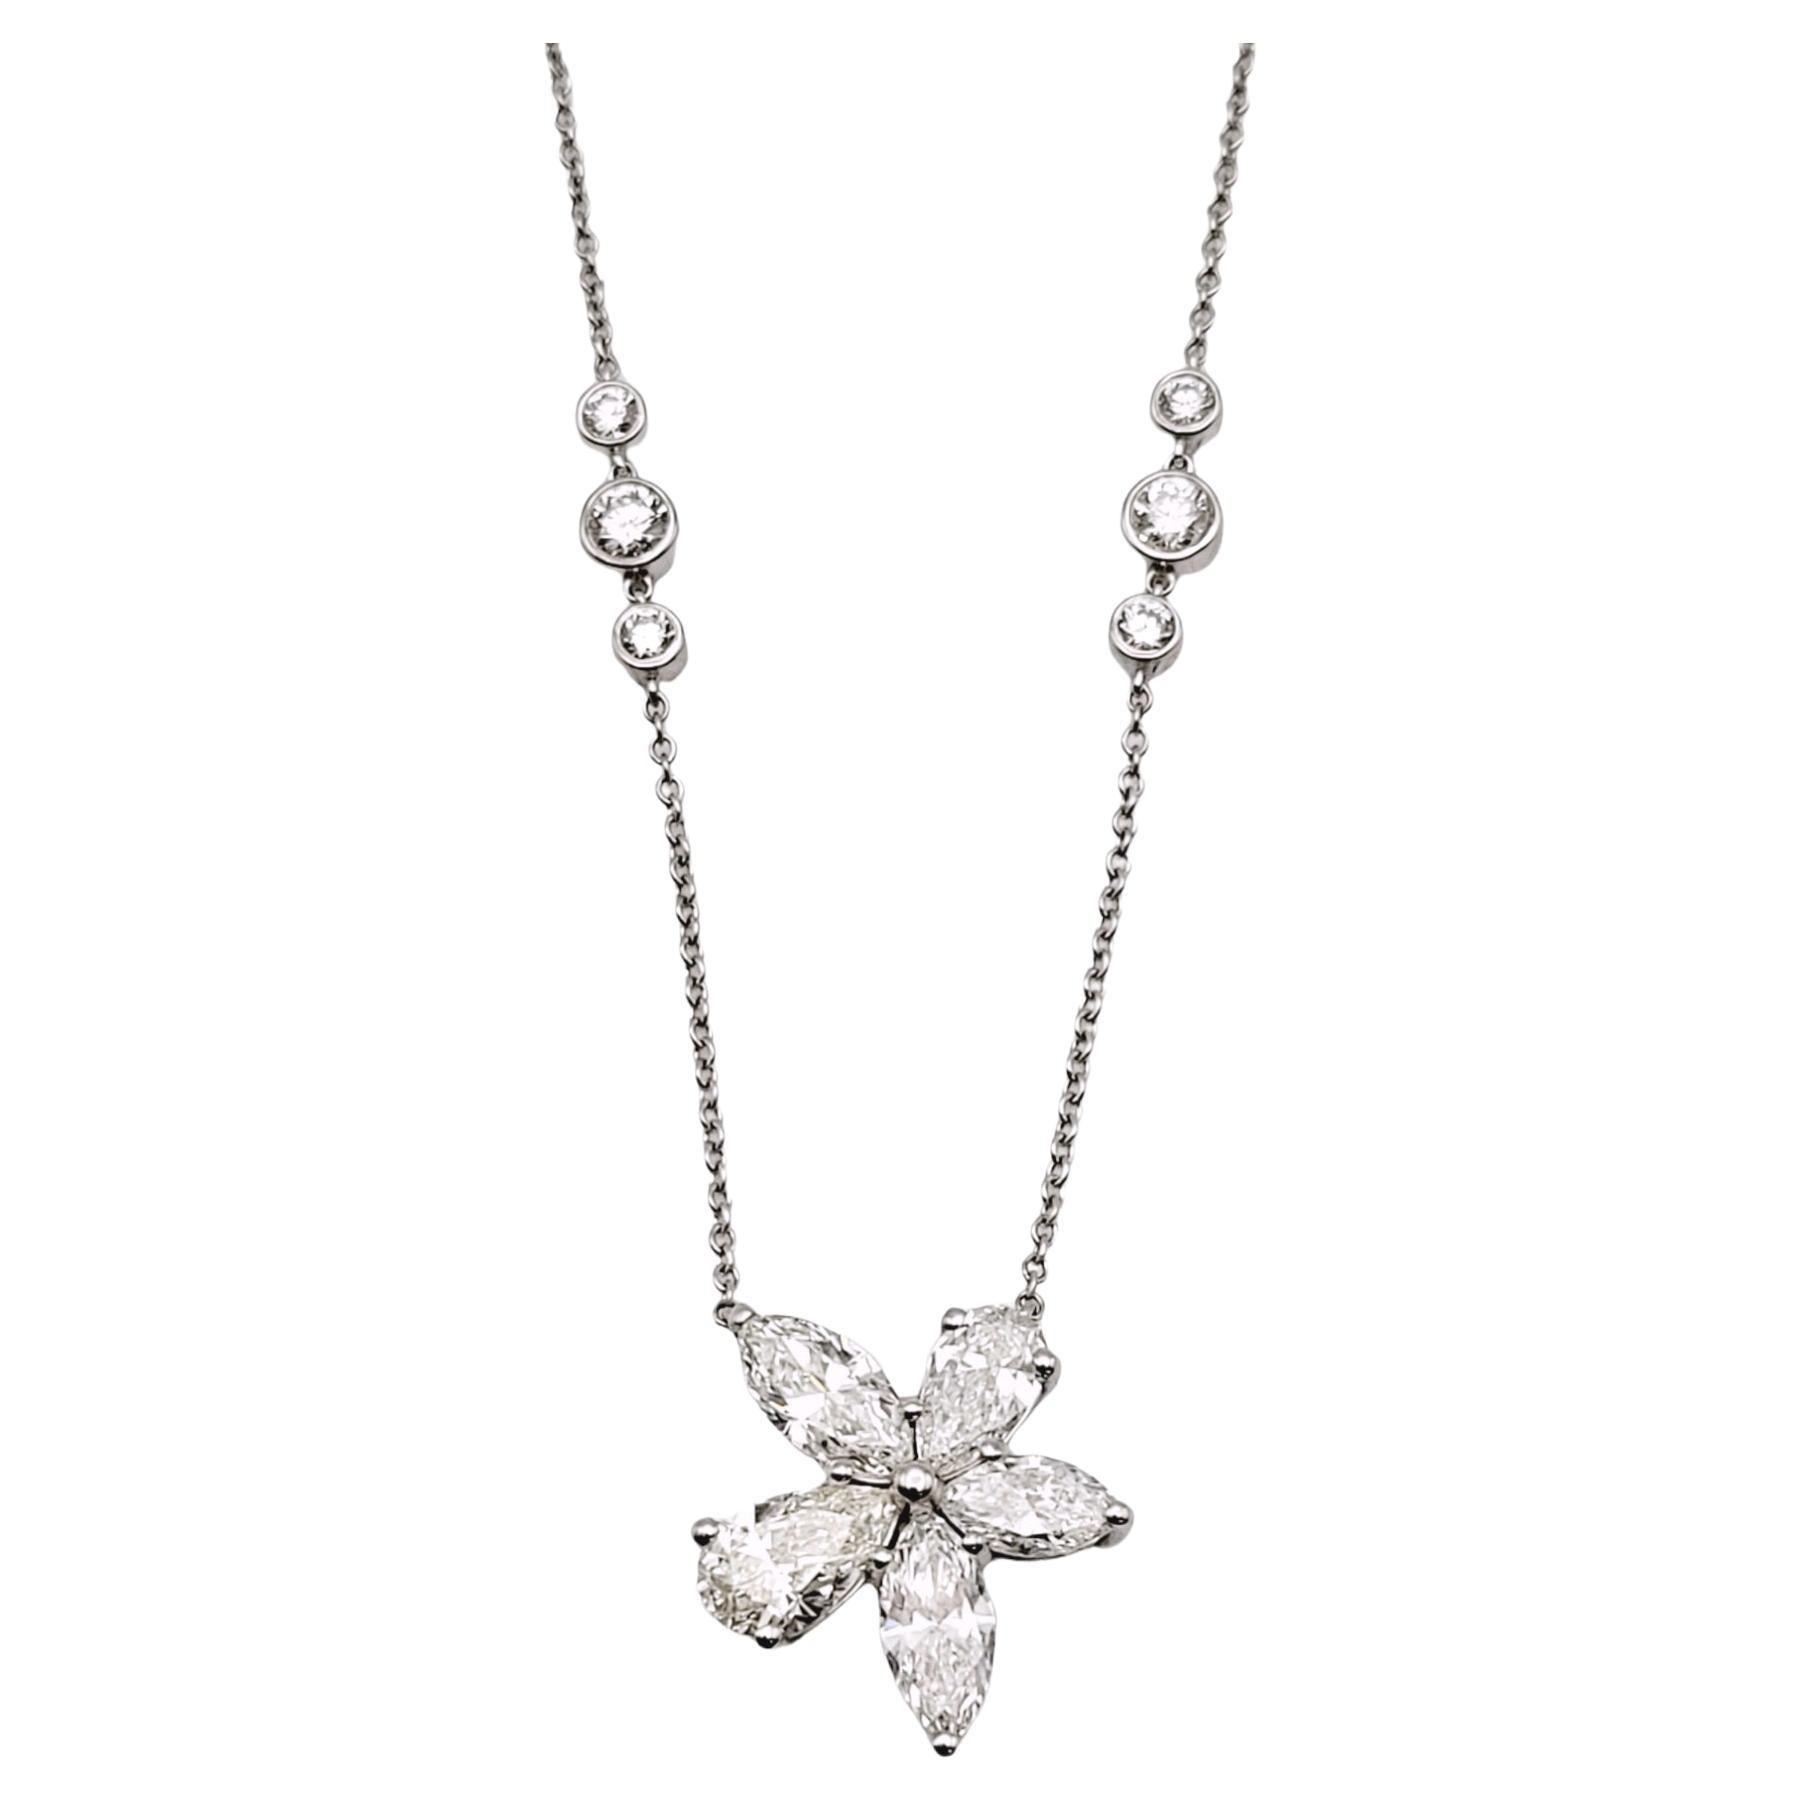 This incredible, ultra feminine diamond necklace by Tiffany & Co. is simply stunning. Part of the popular Victoria Collection, this mixed cluster pendant necklace features several icy white Tiffany diamonds in varying shapes set within a delicate